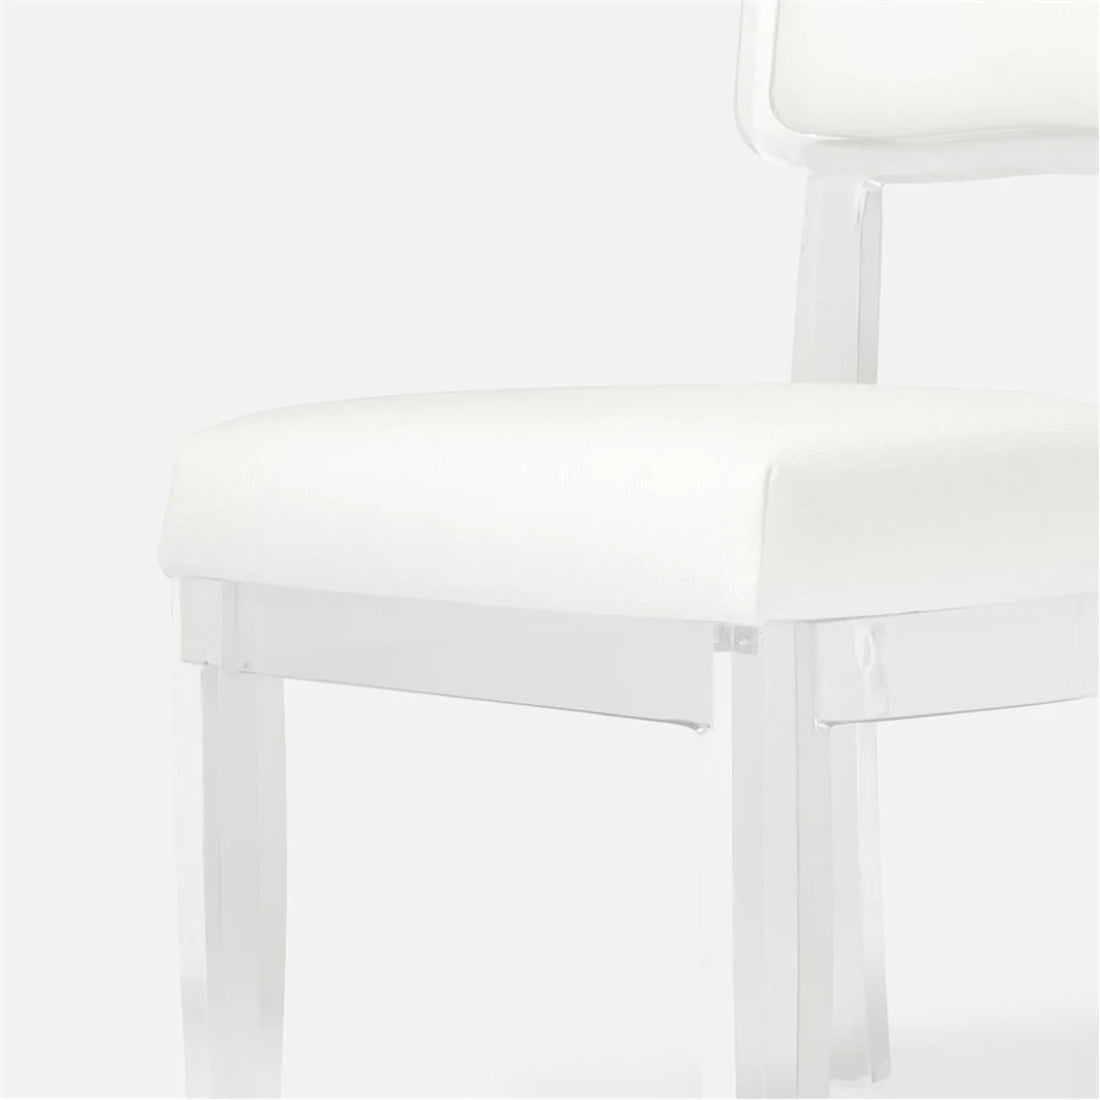 Made Goods Aaliyah Curved Acrylic Dining Chair in Danube Fabric